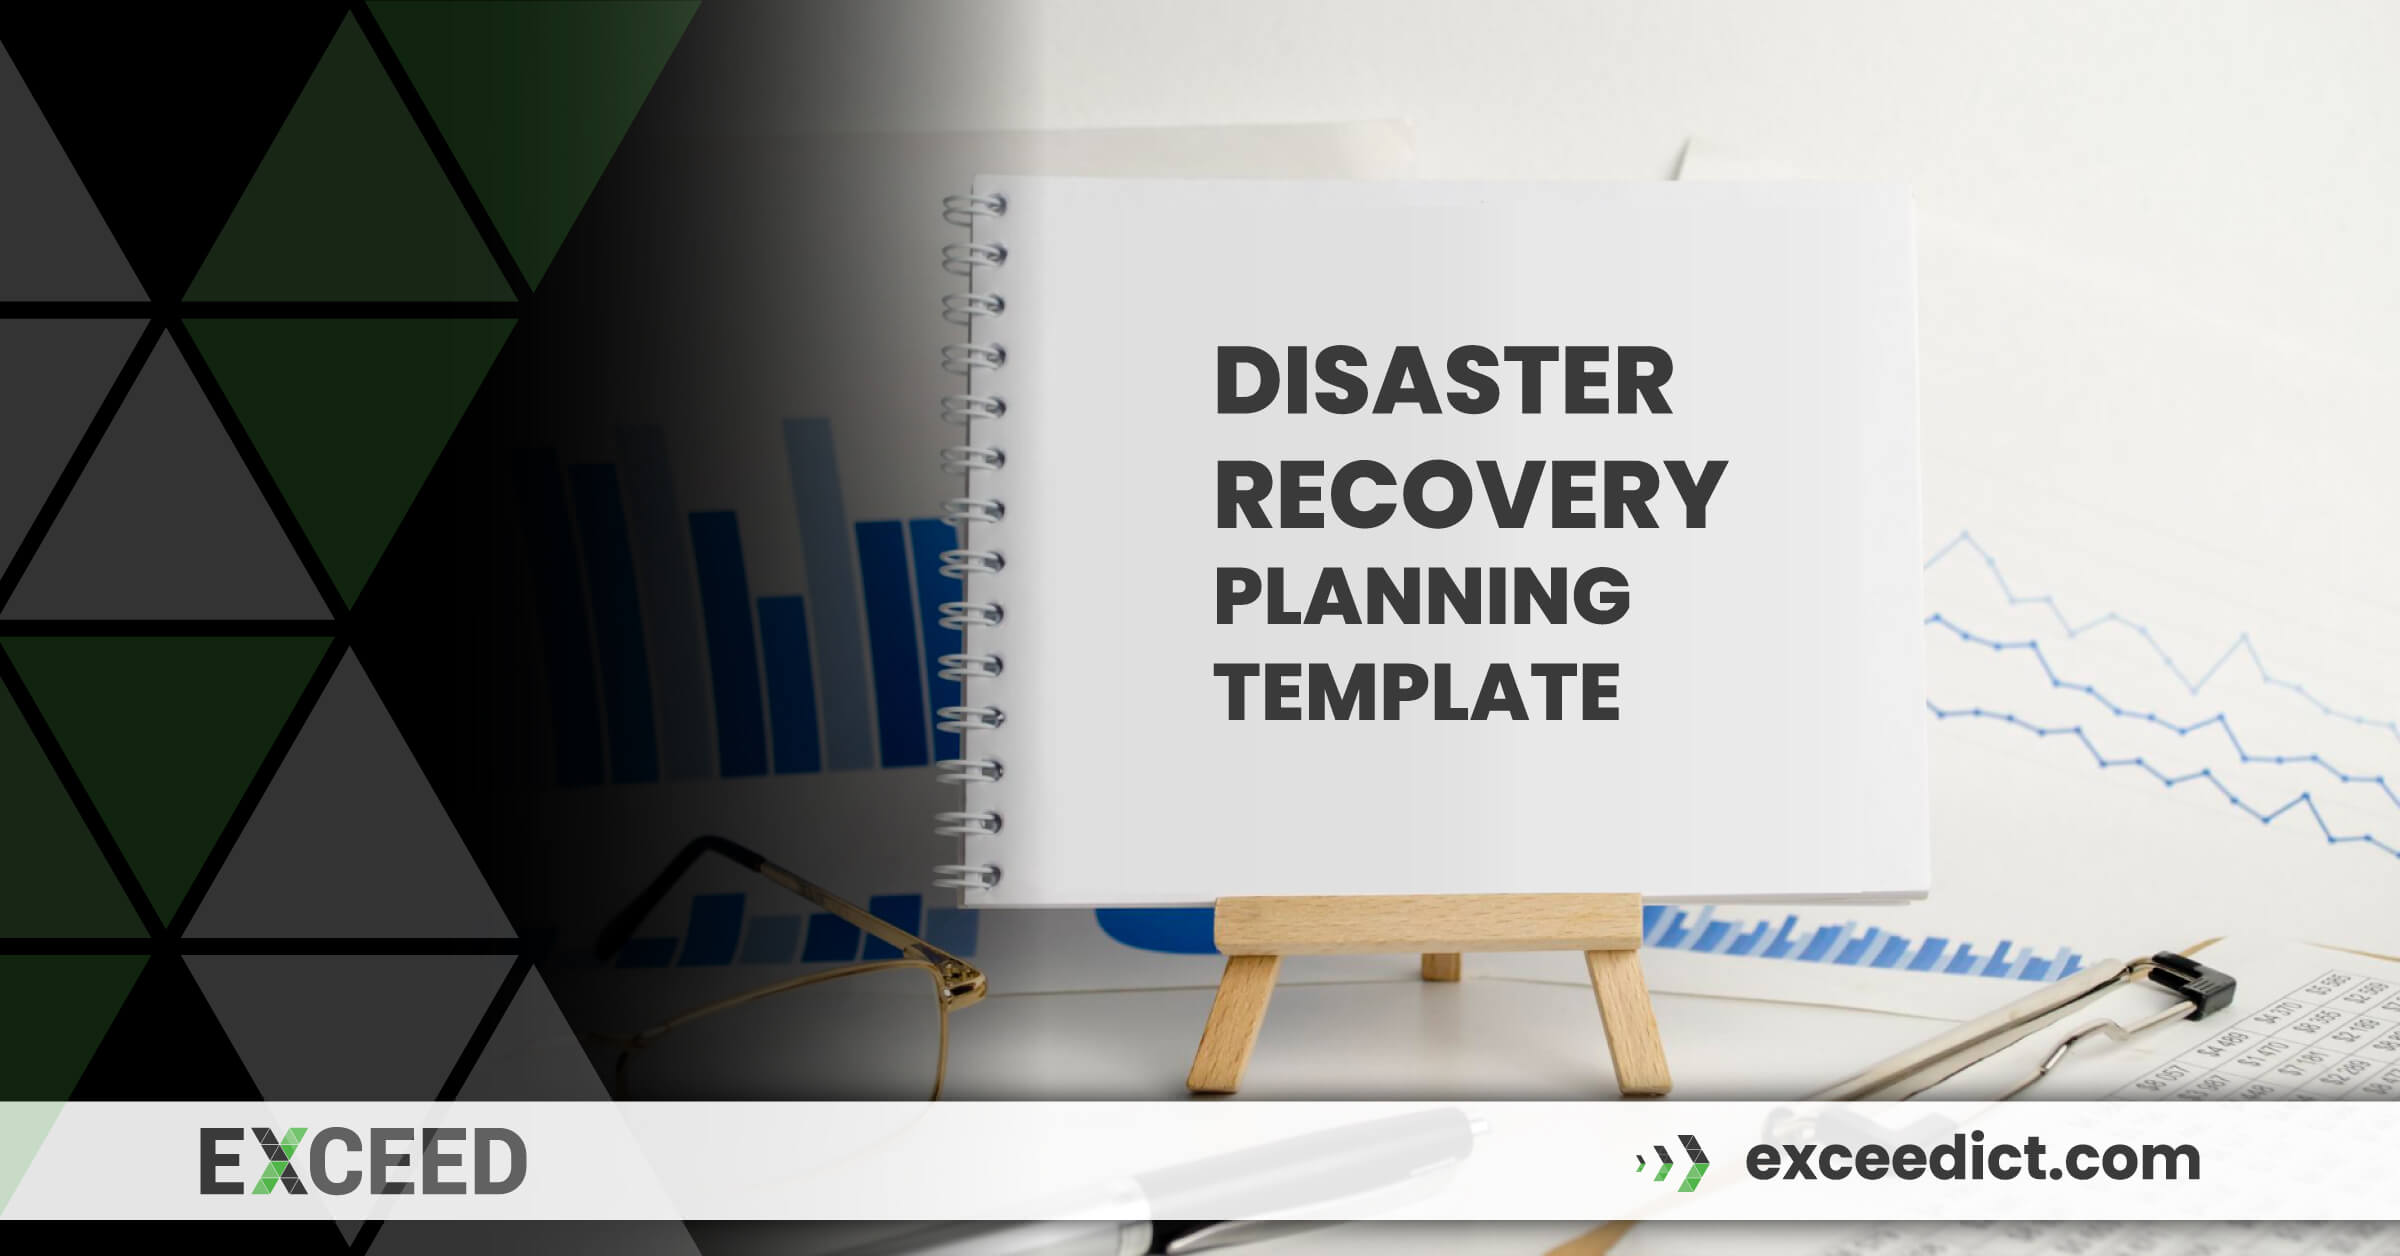 Key Elements of IT Disaster Recovery Planning Template